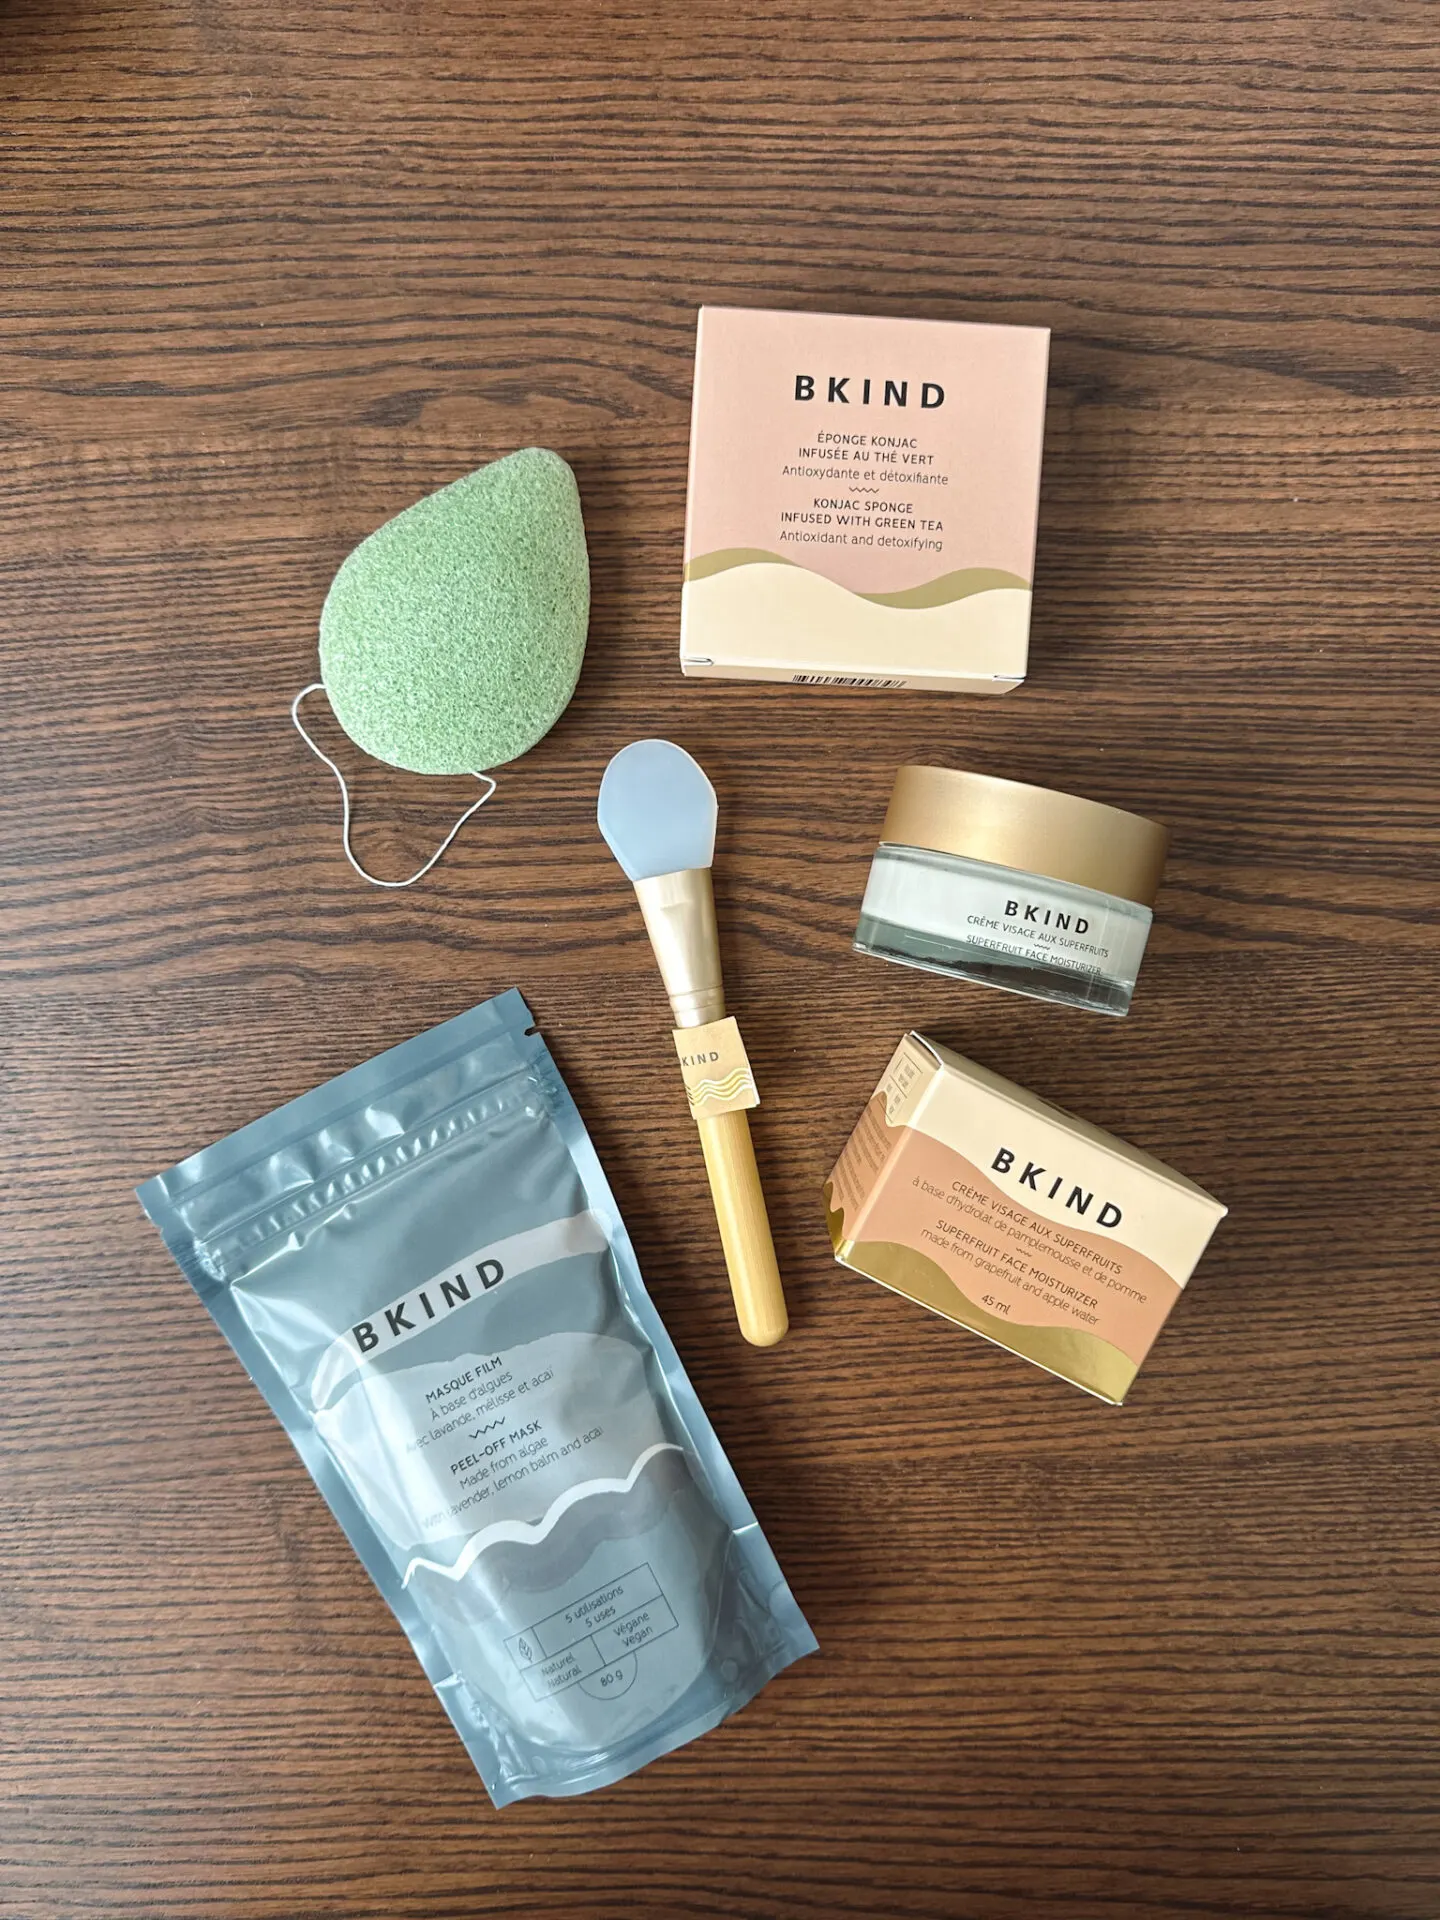 Skincare and beauty products from BKIND in Montreal